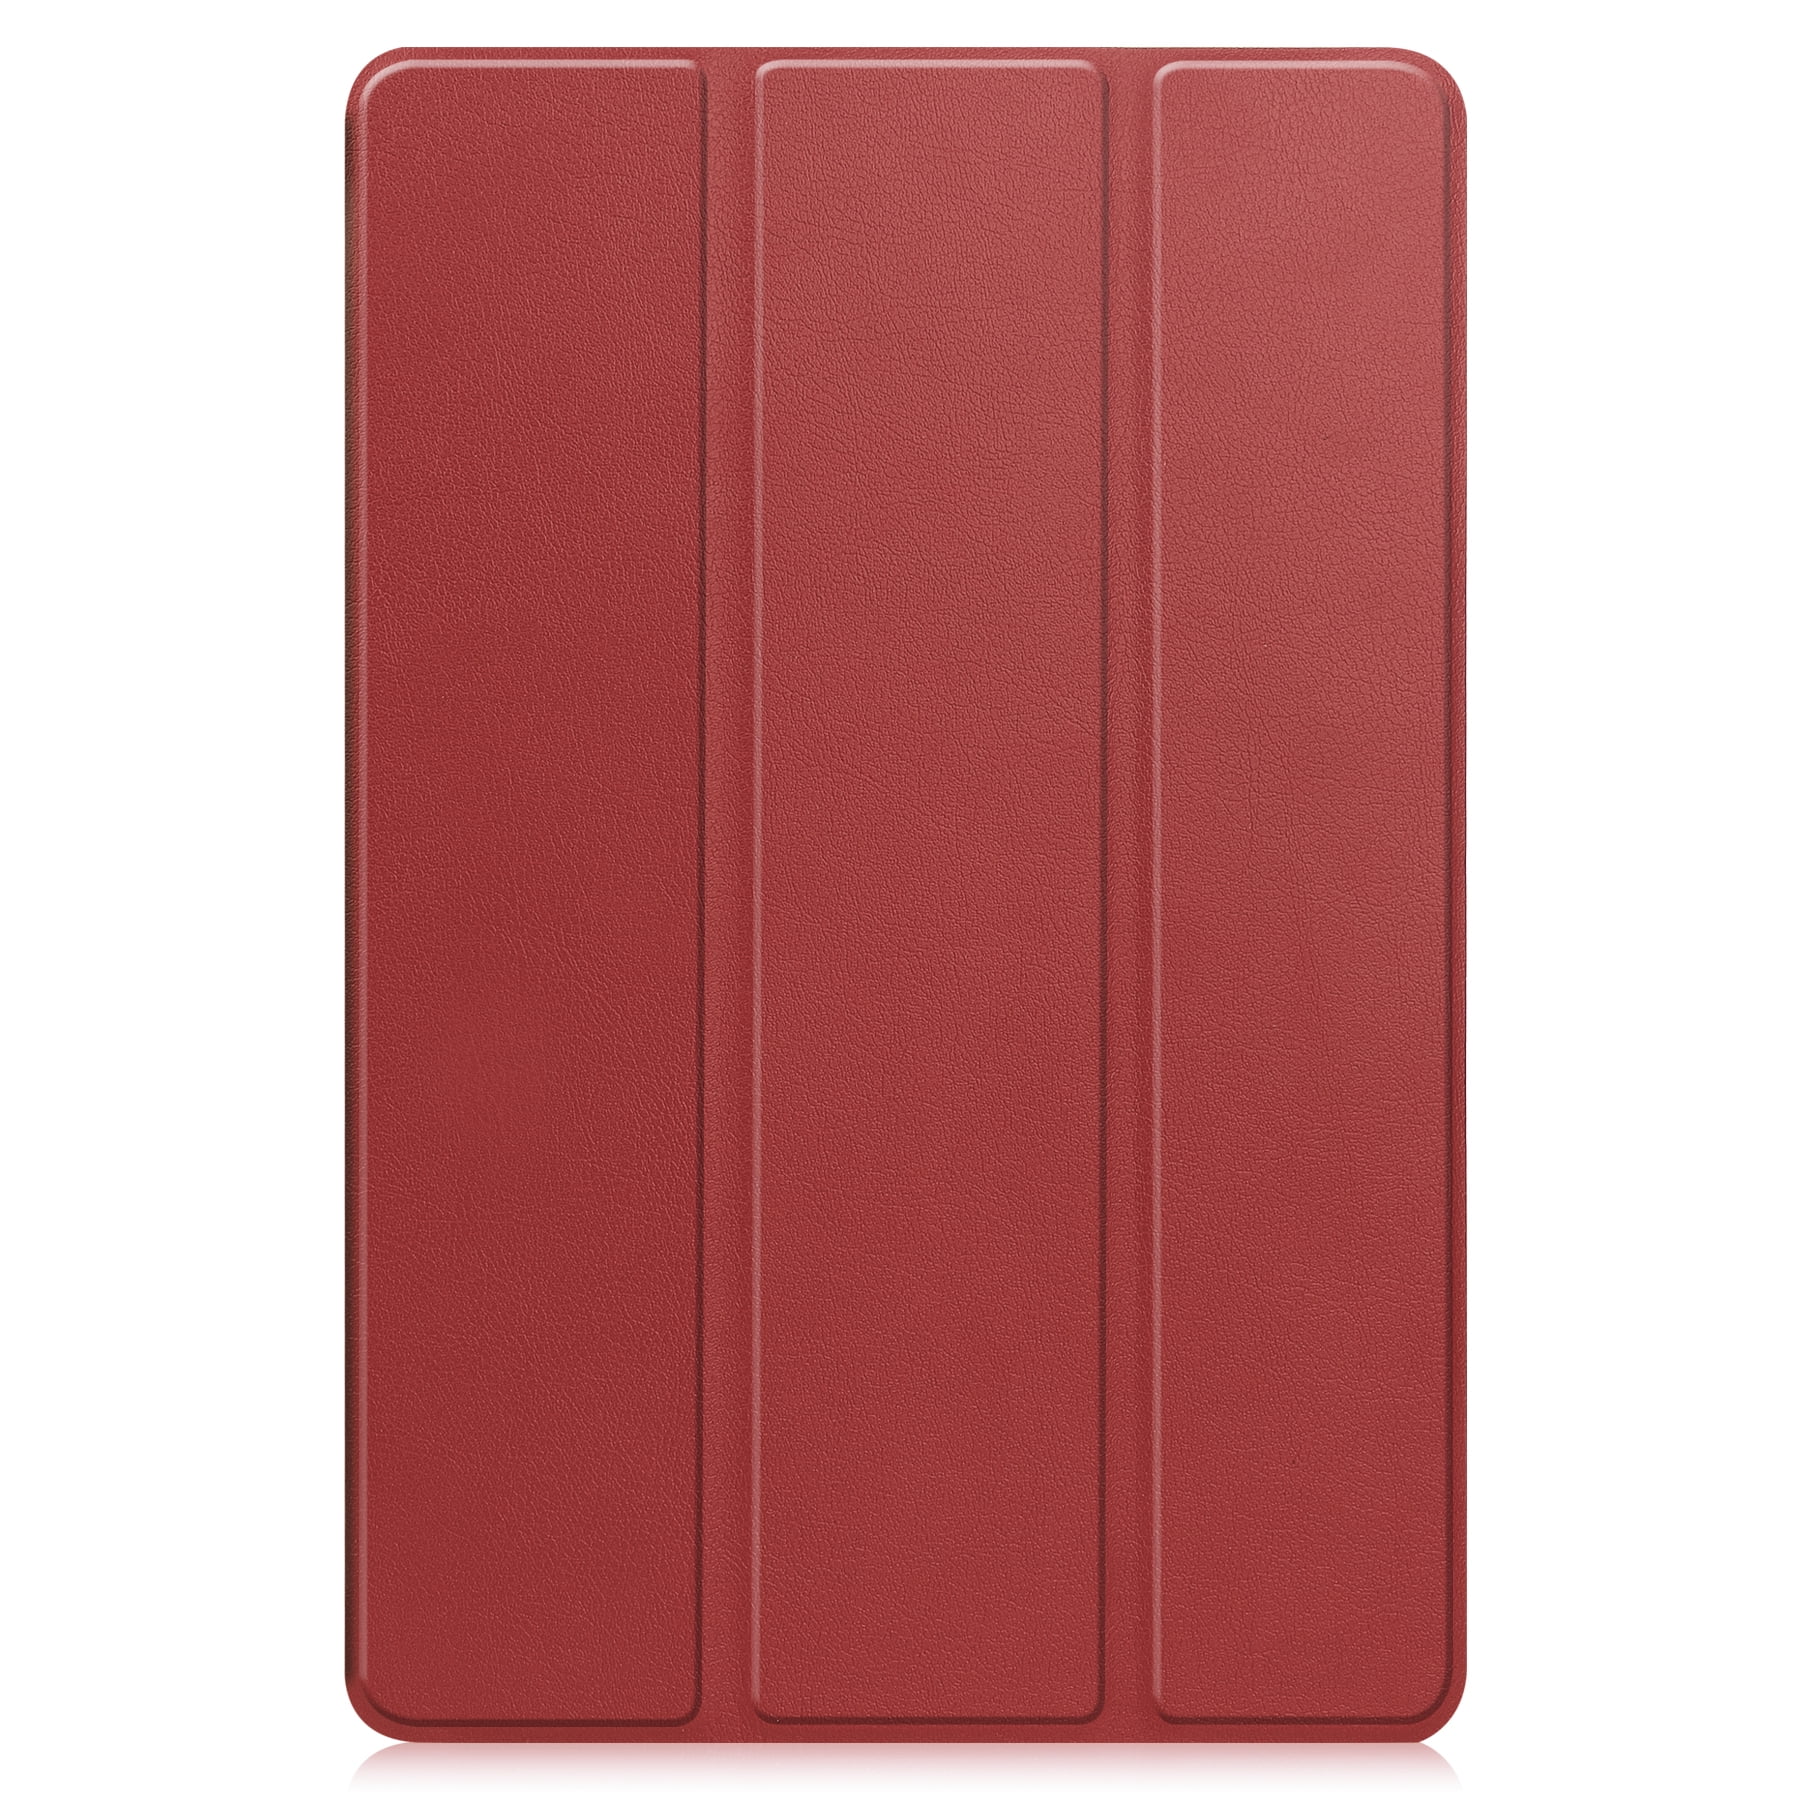 Allytech Slim Case for  Fire Max 11, Fire Max 11 Case, Trifold Stand  Shockproof Auto Sleep Wake Protective Drop Proof Case Cover for  Fire  Max 11 2023 - Winered 